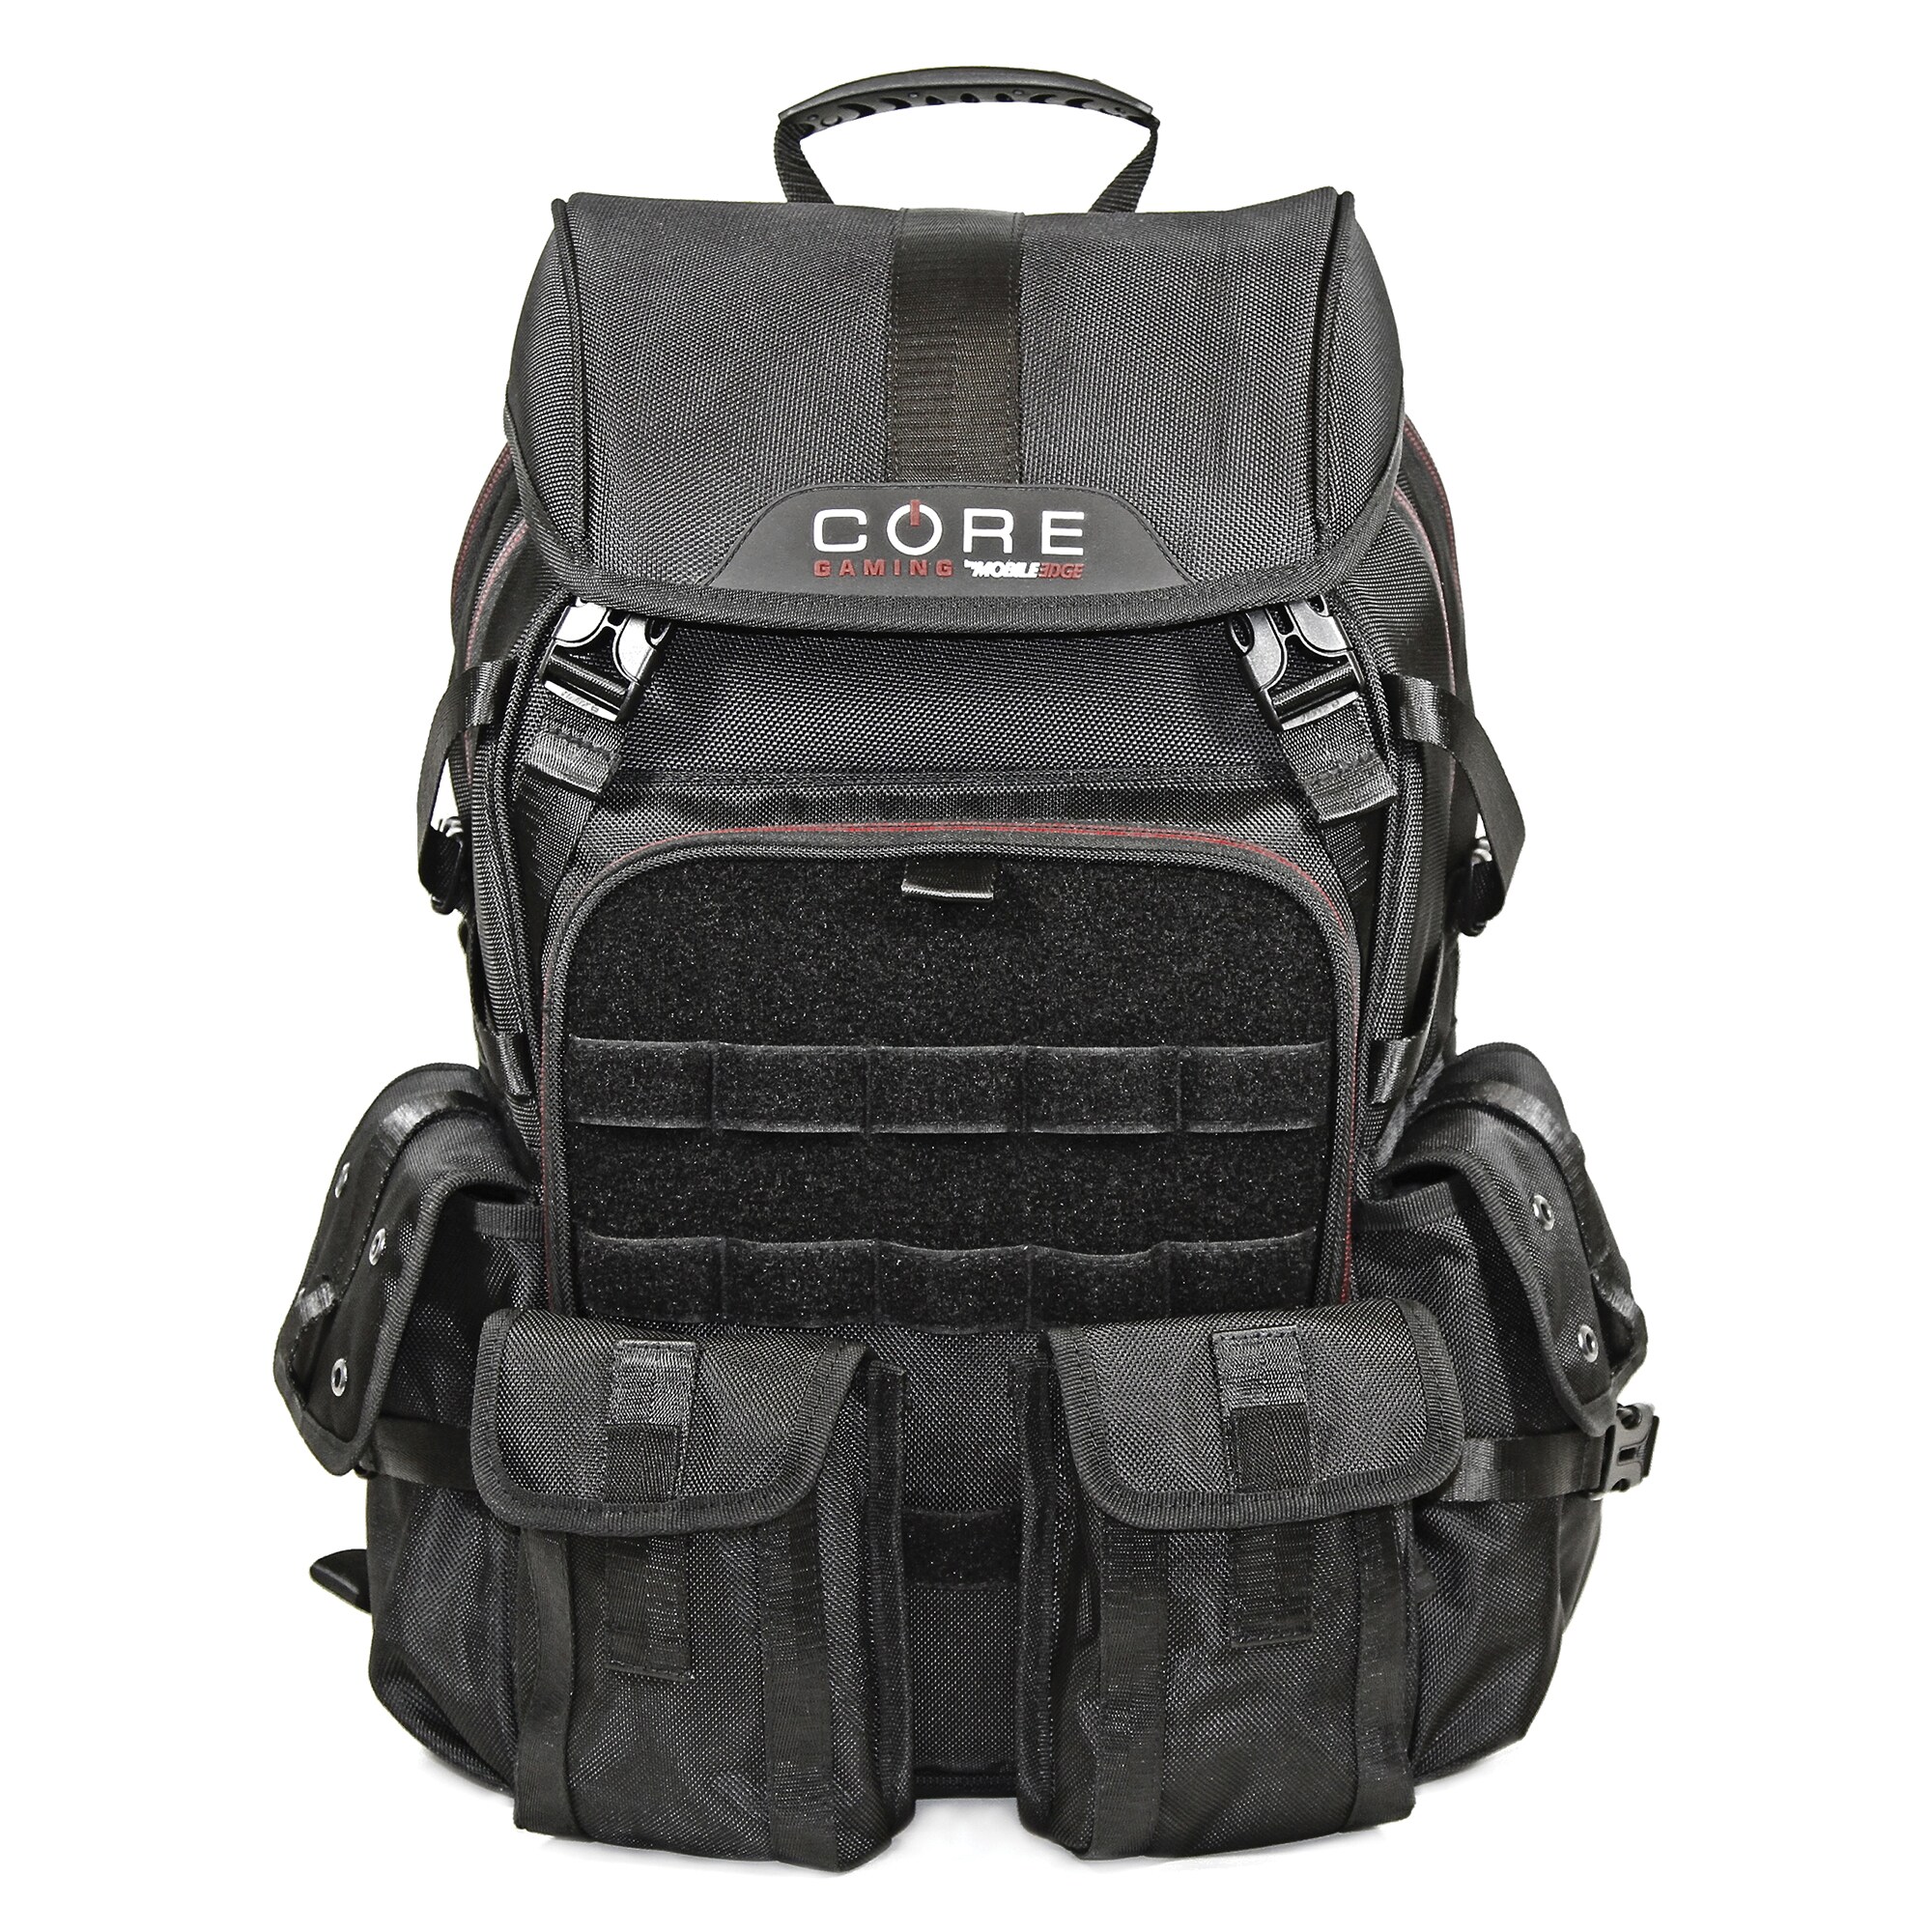 NEW Ego Tactical Fishing Backpack Review! 